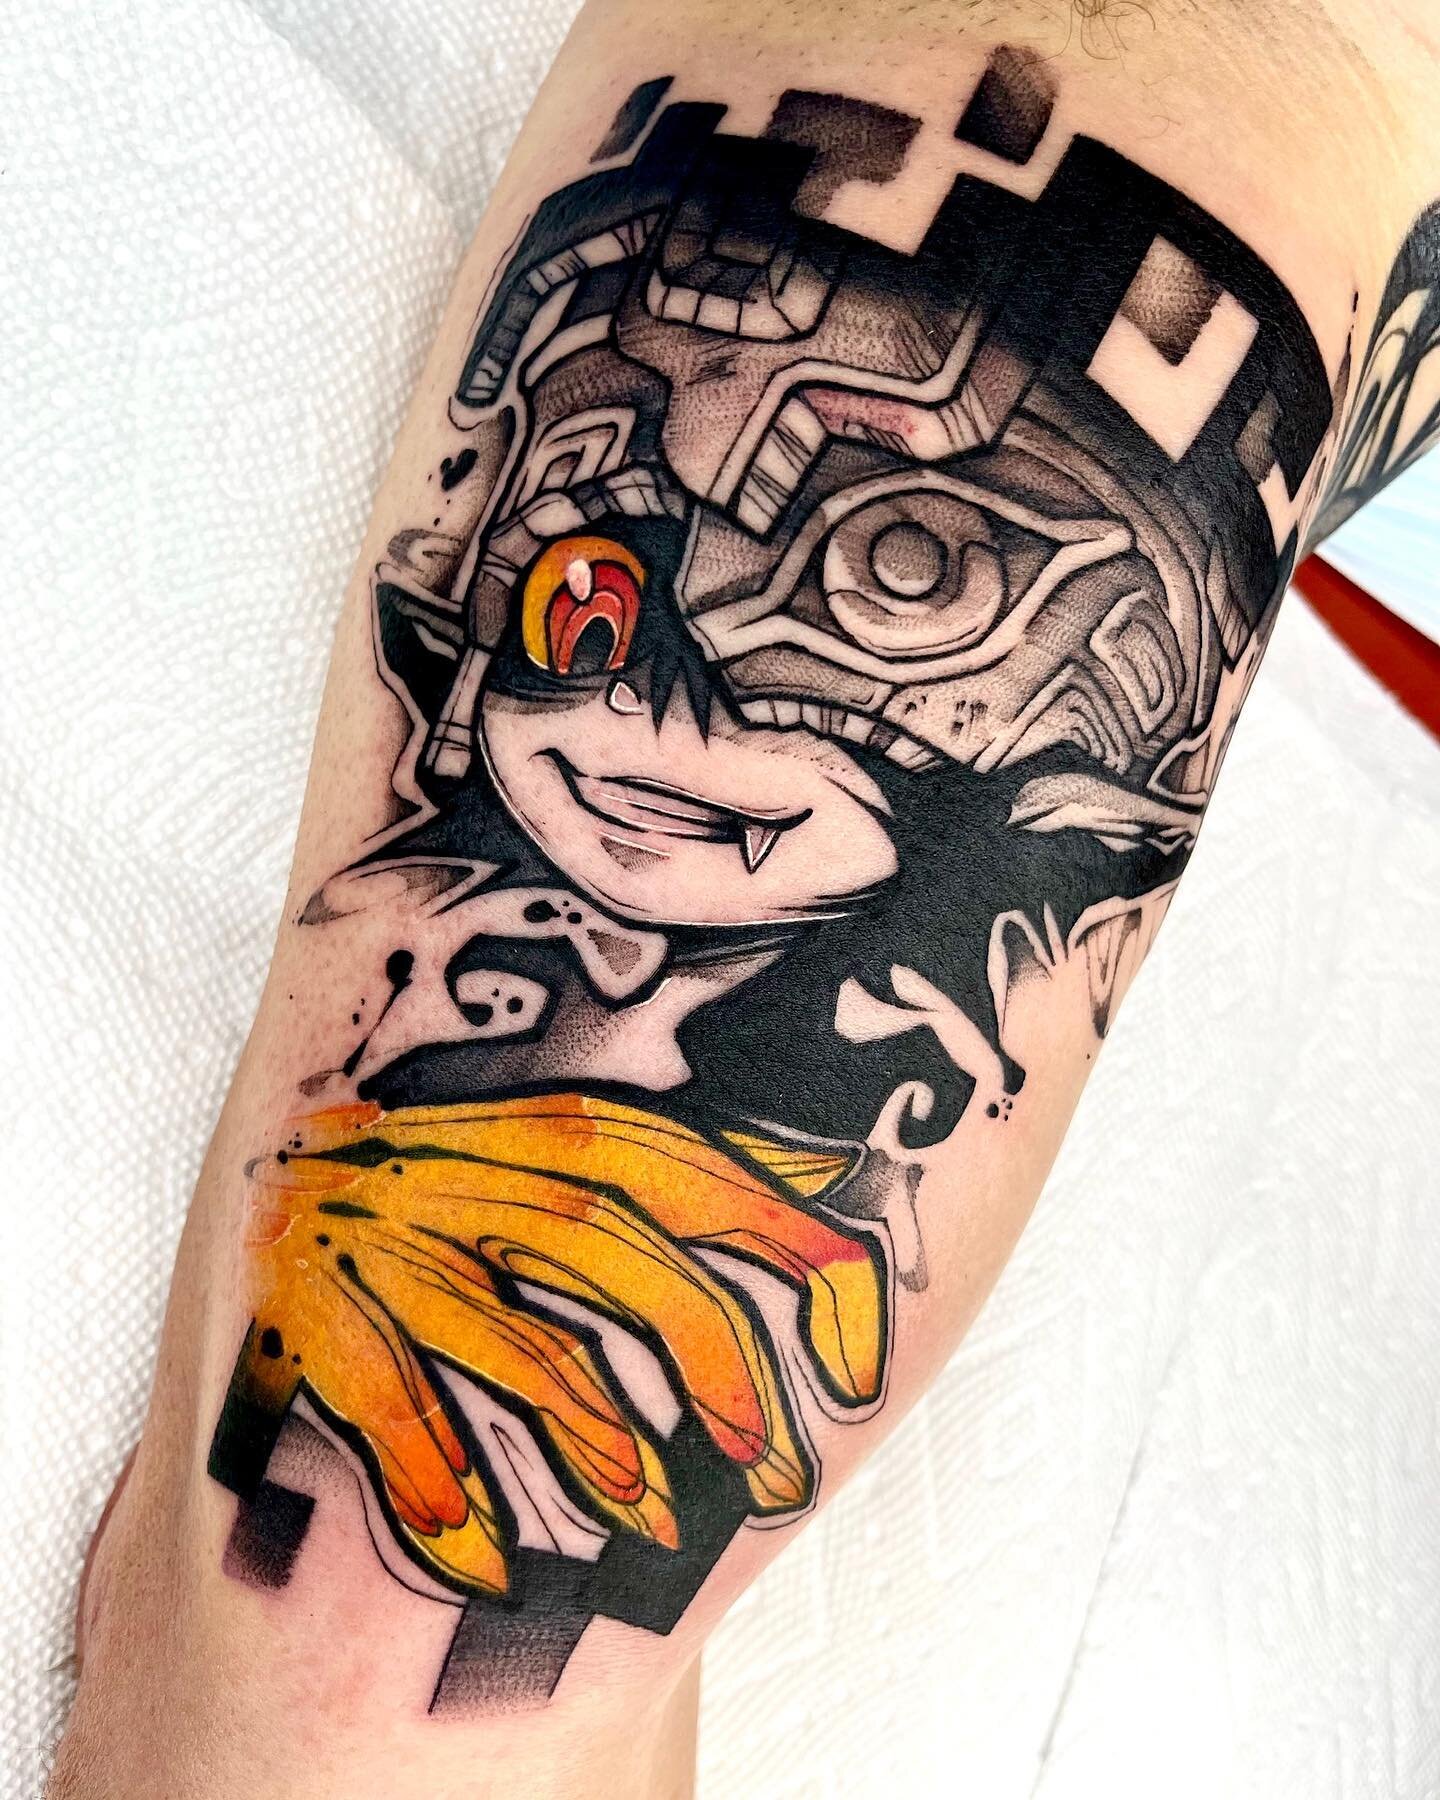 Everyone&rsquo;s favorite Zelda companion, Midna, for @darkjedity (thank you again so much)!! I LOVE doing stuff from any Zelda game so it made my day getting to do some more. Thanks again!
.
.
I really really wanna do more video game related tattoos